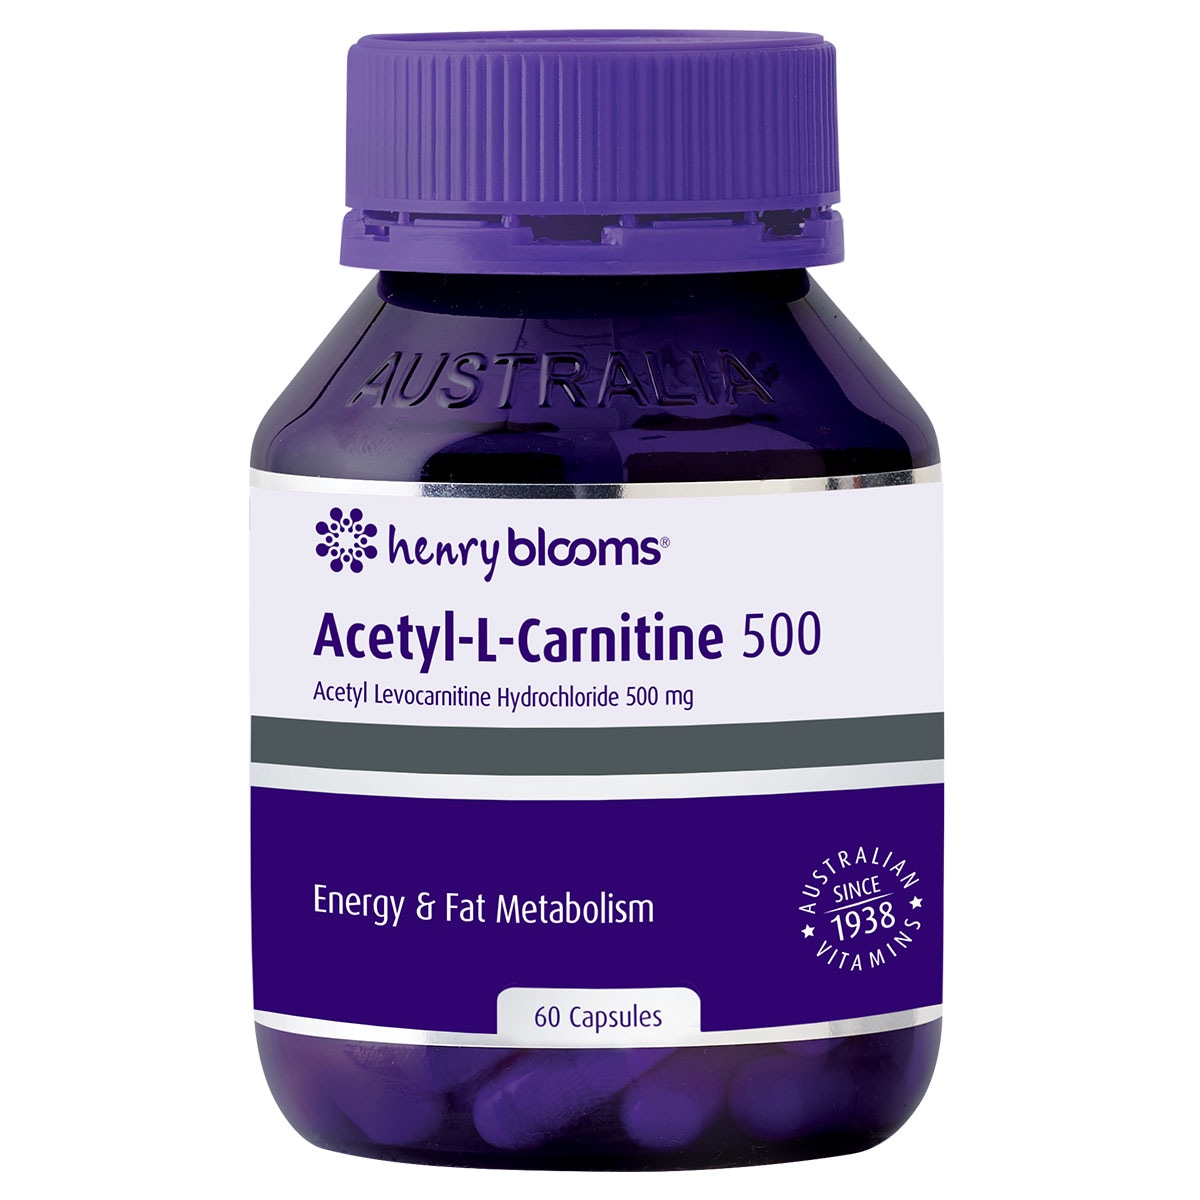 Henry Blooms Acetyl L-Carnitine 500 60 Capsules Australia